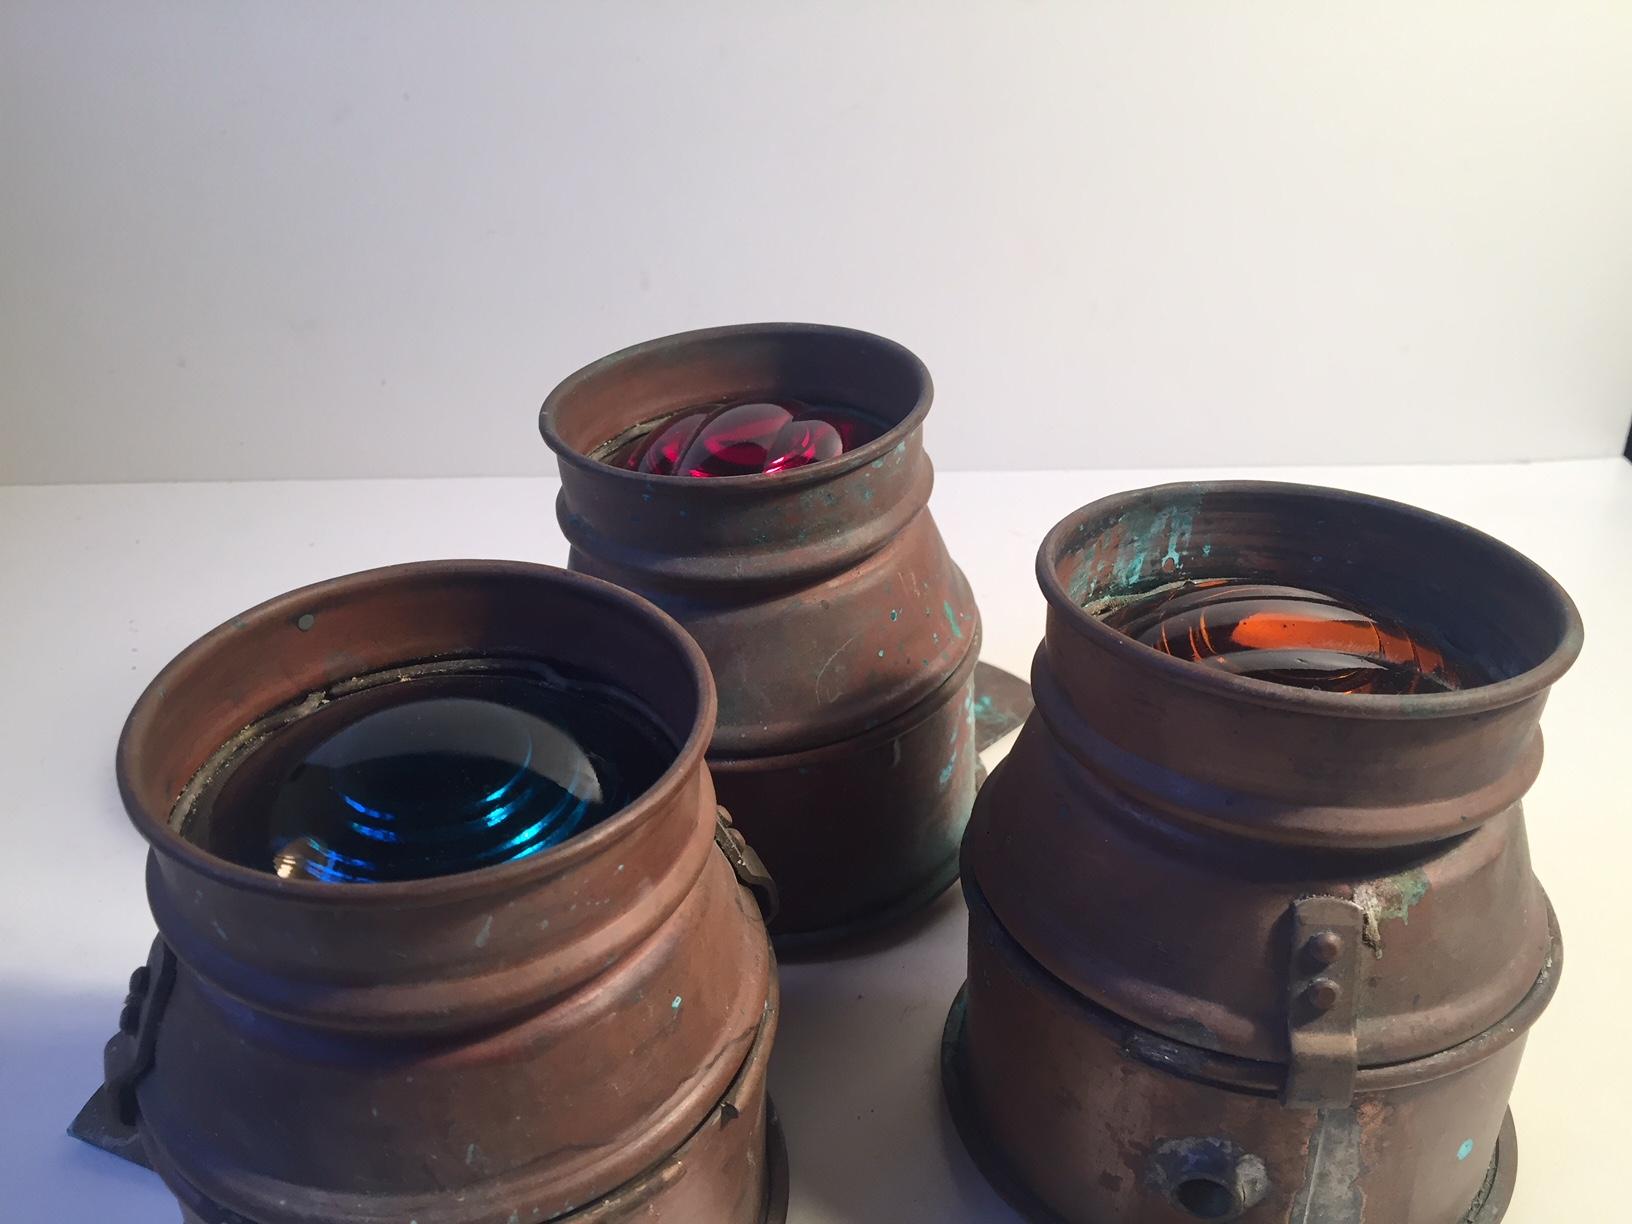 A trio of French maritime copper sconces with colored glass: orange, red and blue. They have been mounted on a ship as signal lights. They are all intact and installed with their original Bayonet Mount/socket typical of French lightning. The lights